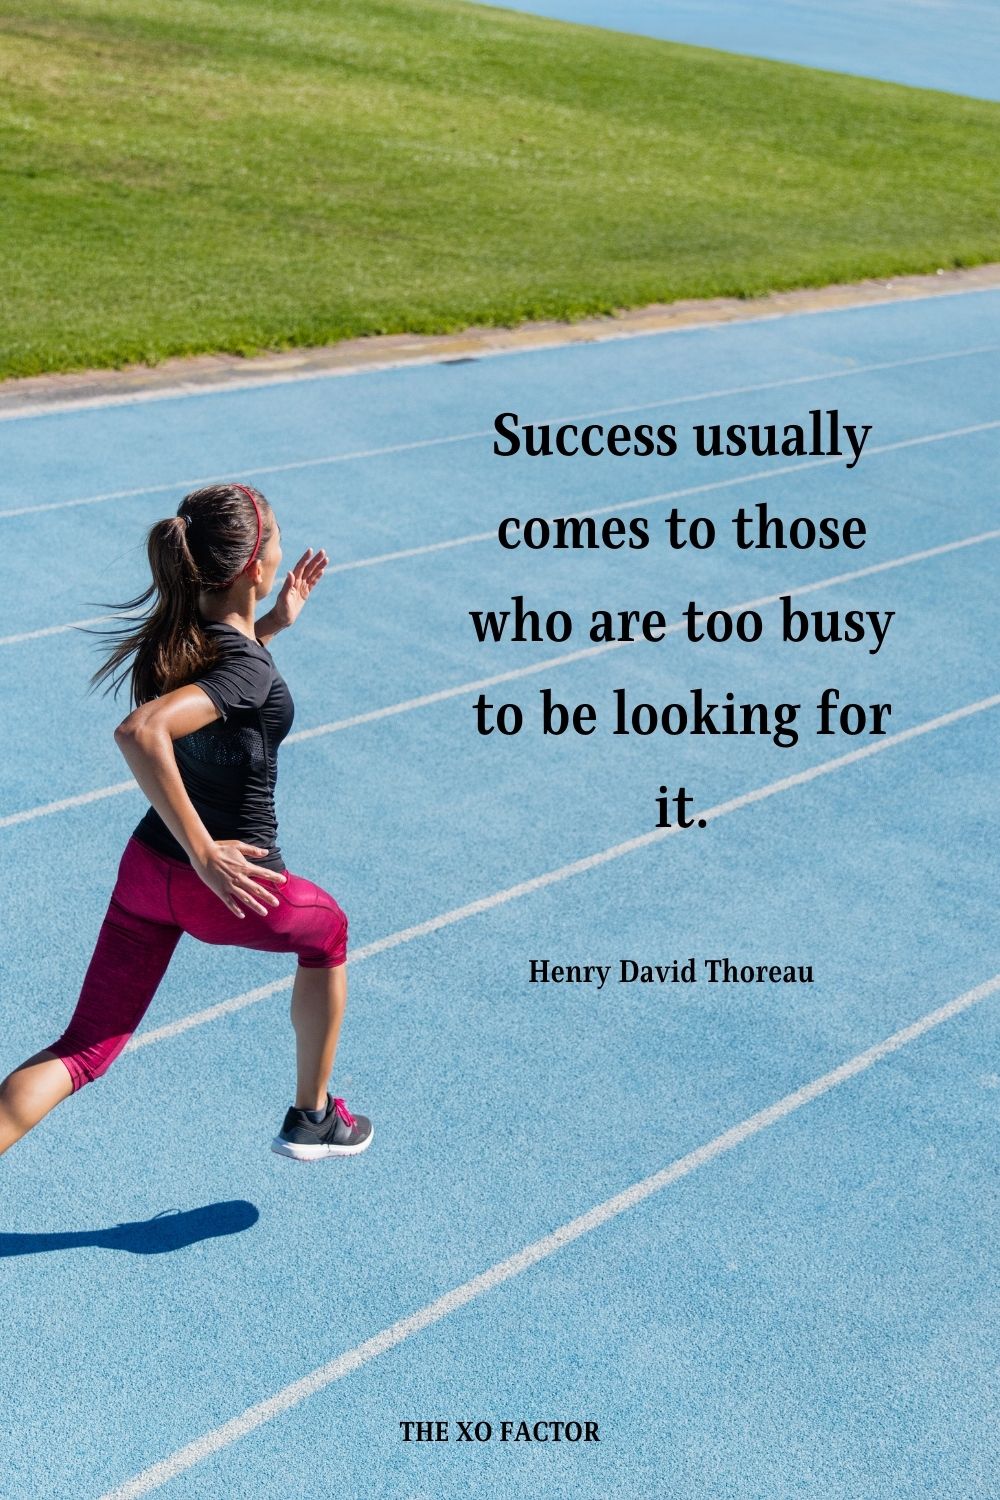 Success usually comes to those who are too busy to be looking for it. Henry David Thoreau